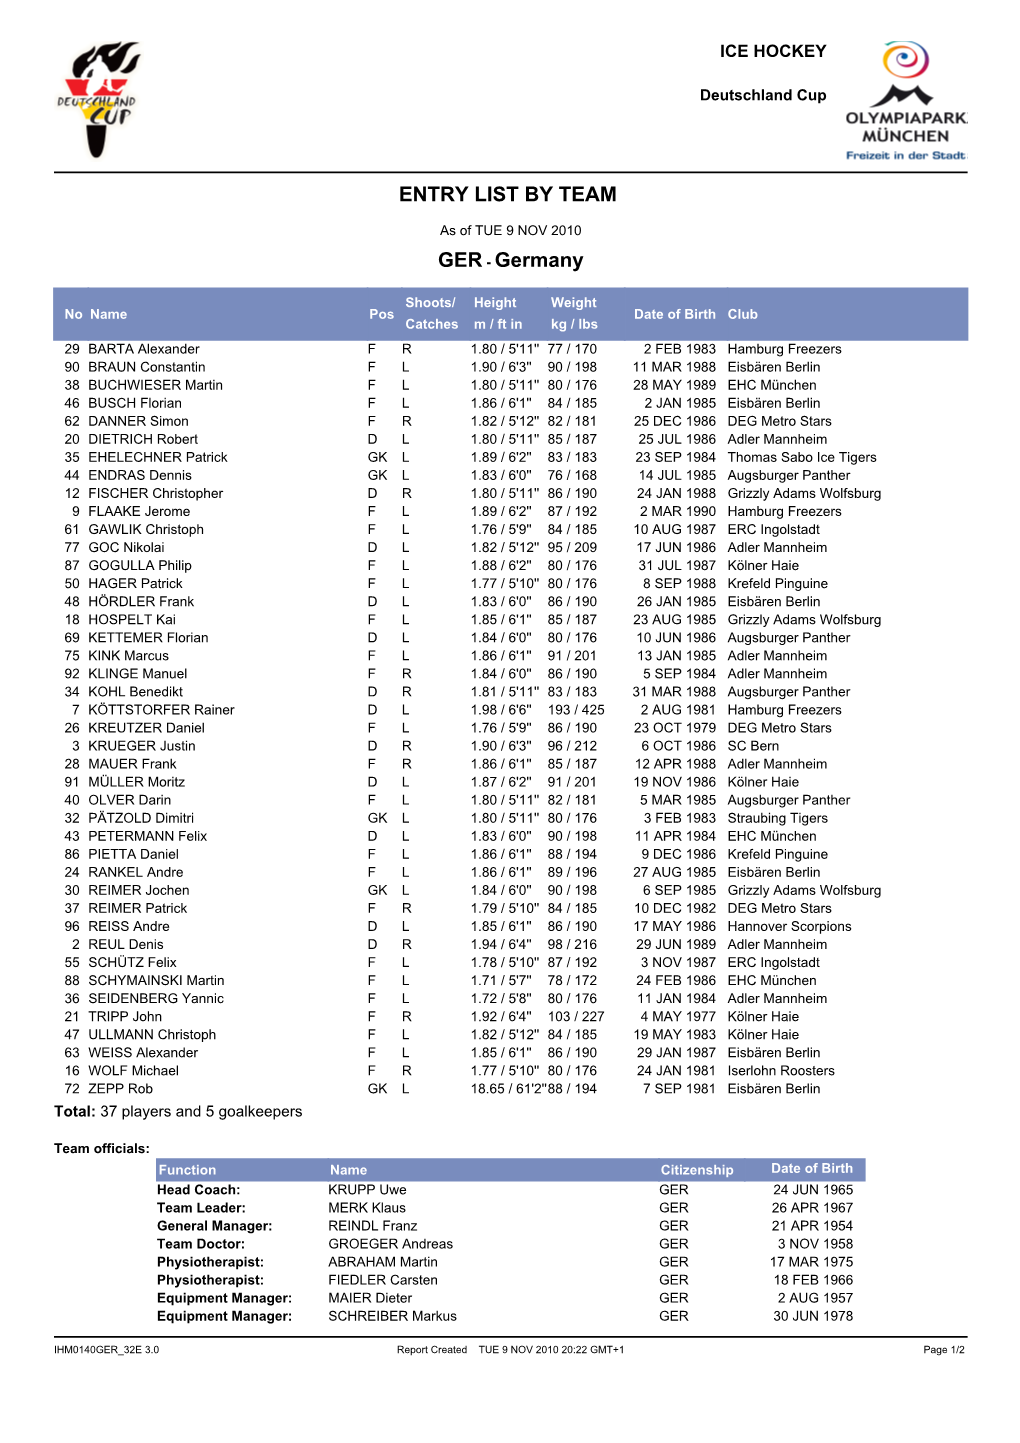 Entry List by Team